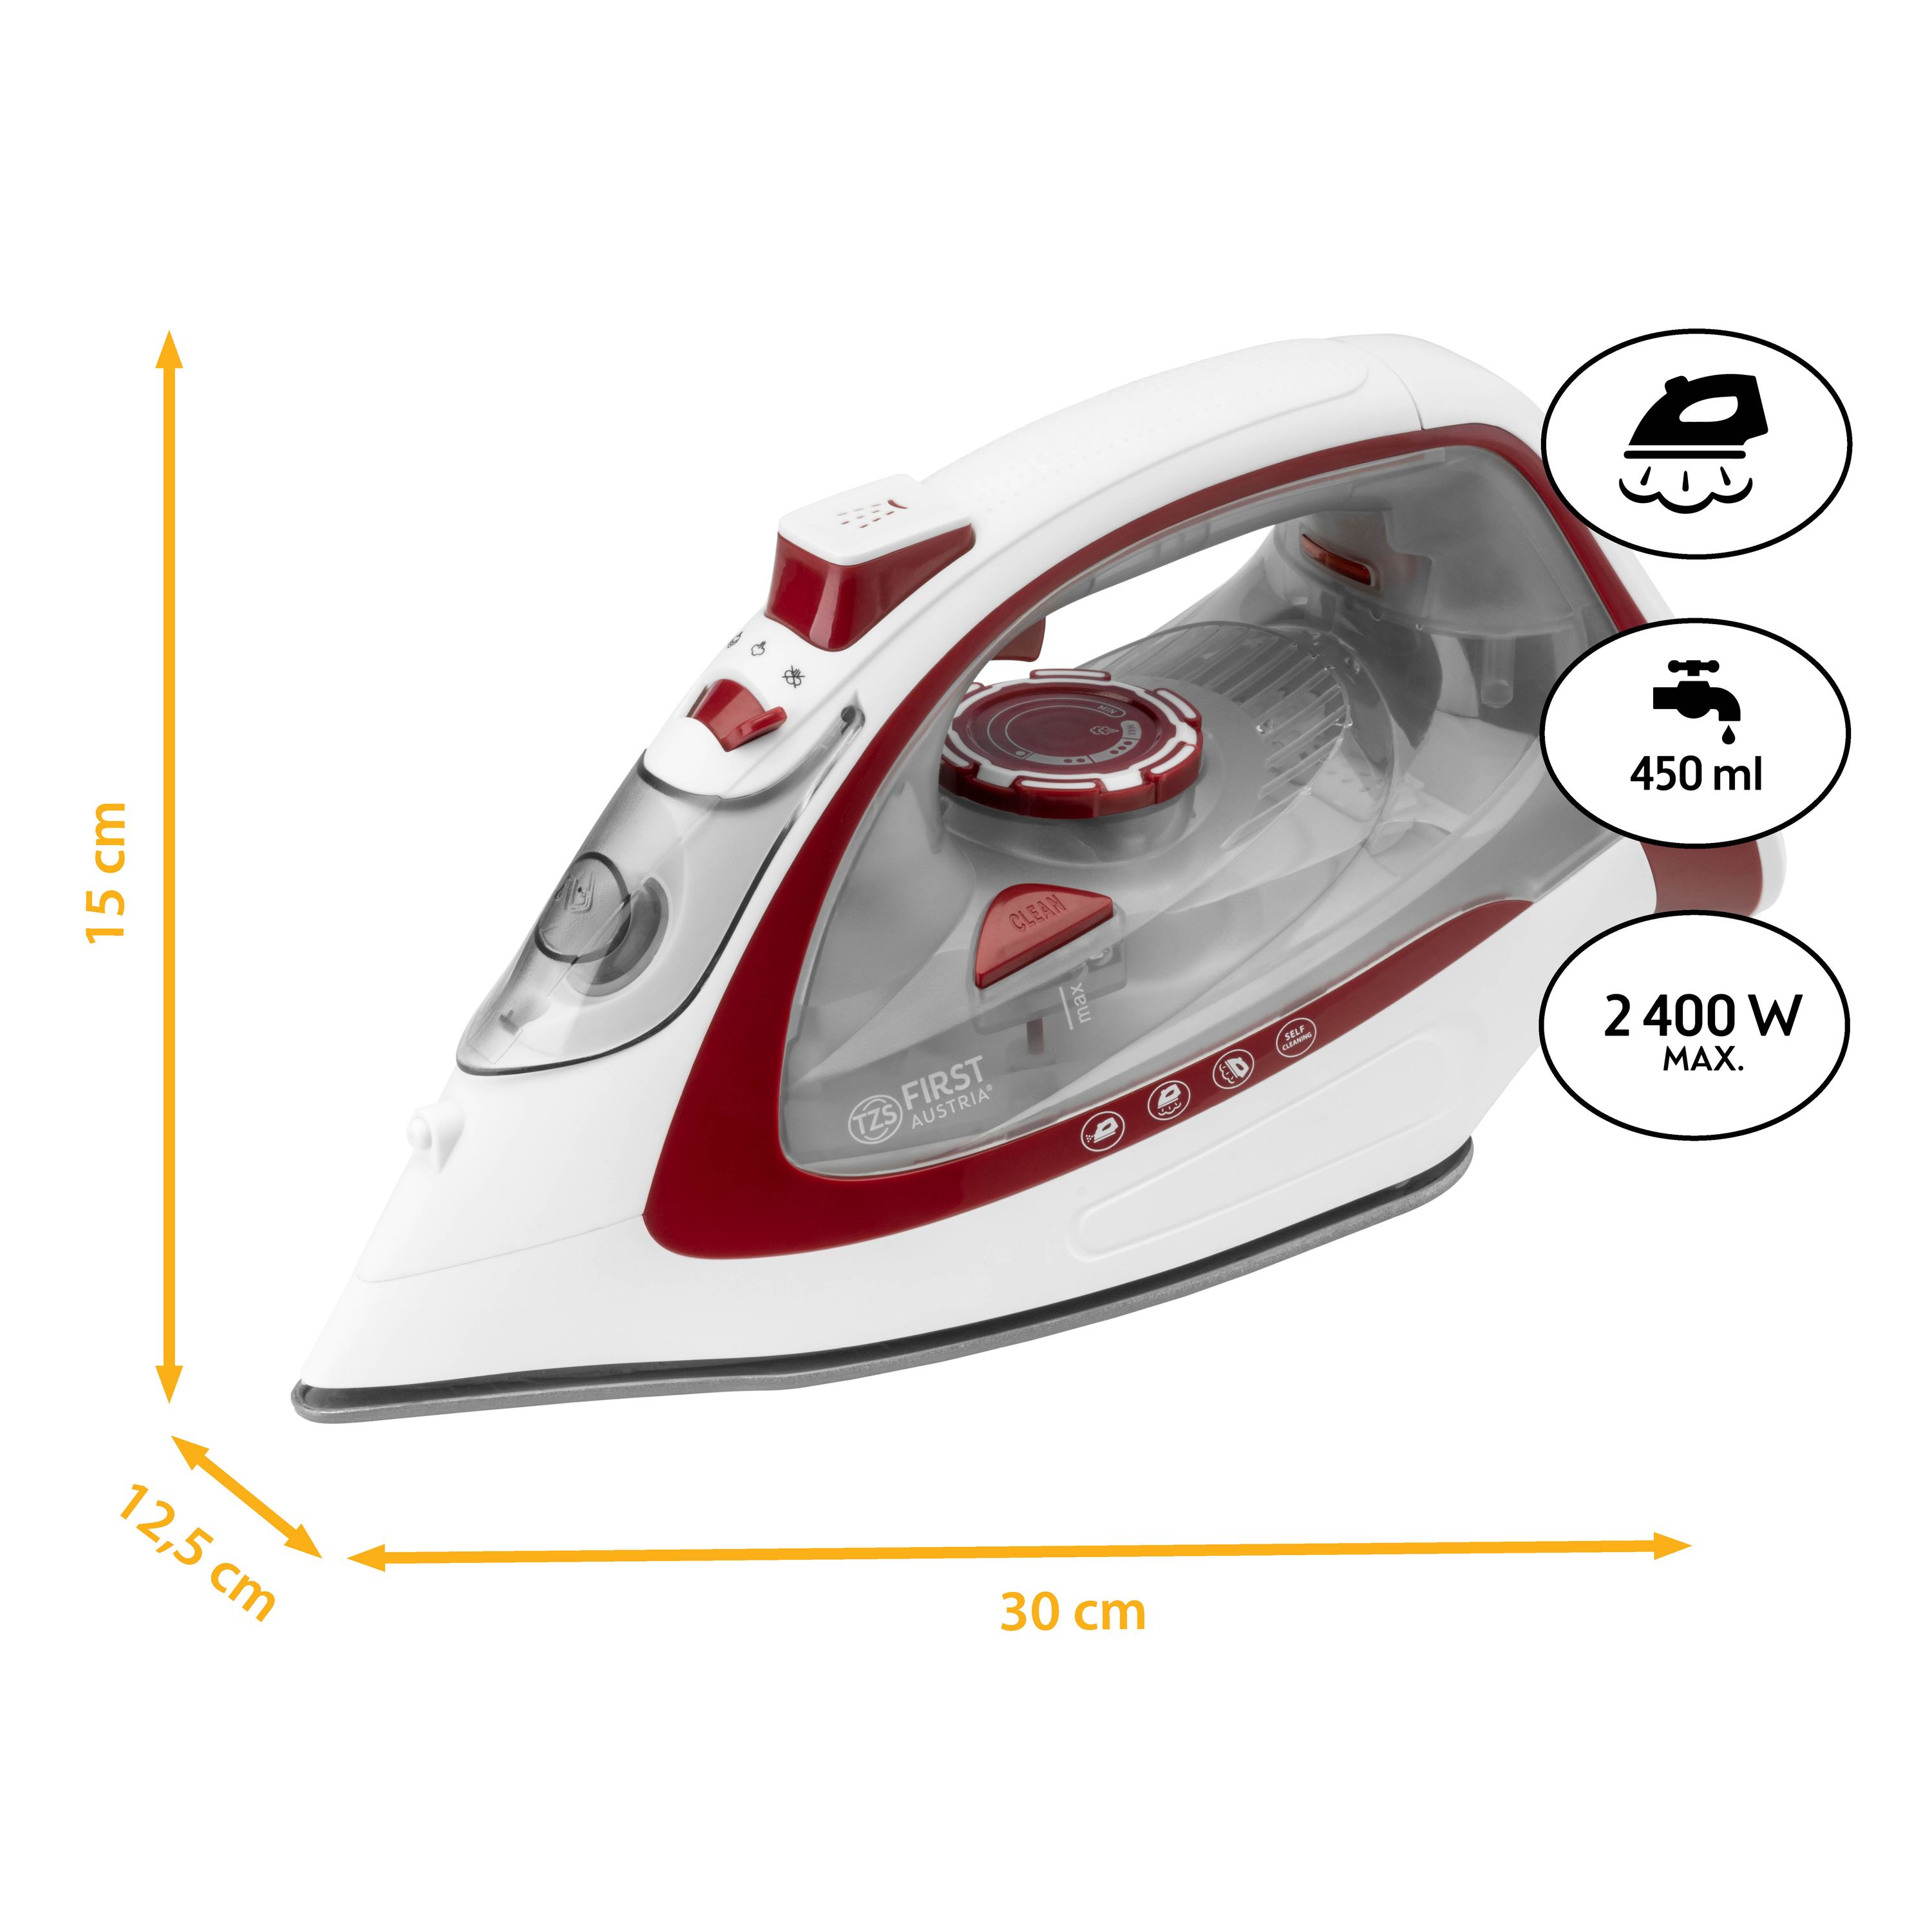 Steam iron | cordless with ironing station